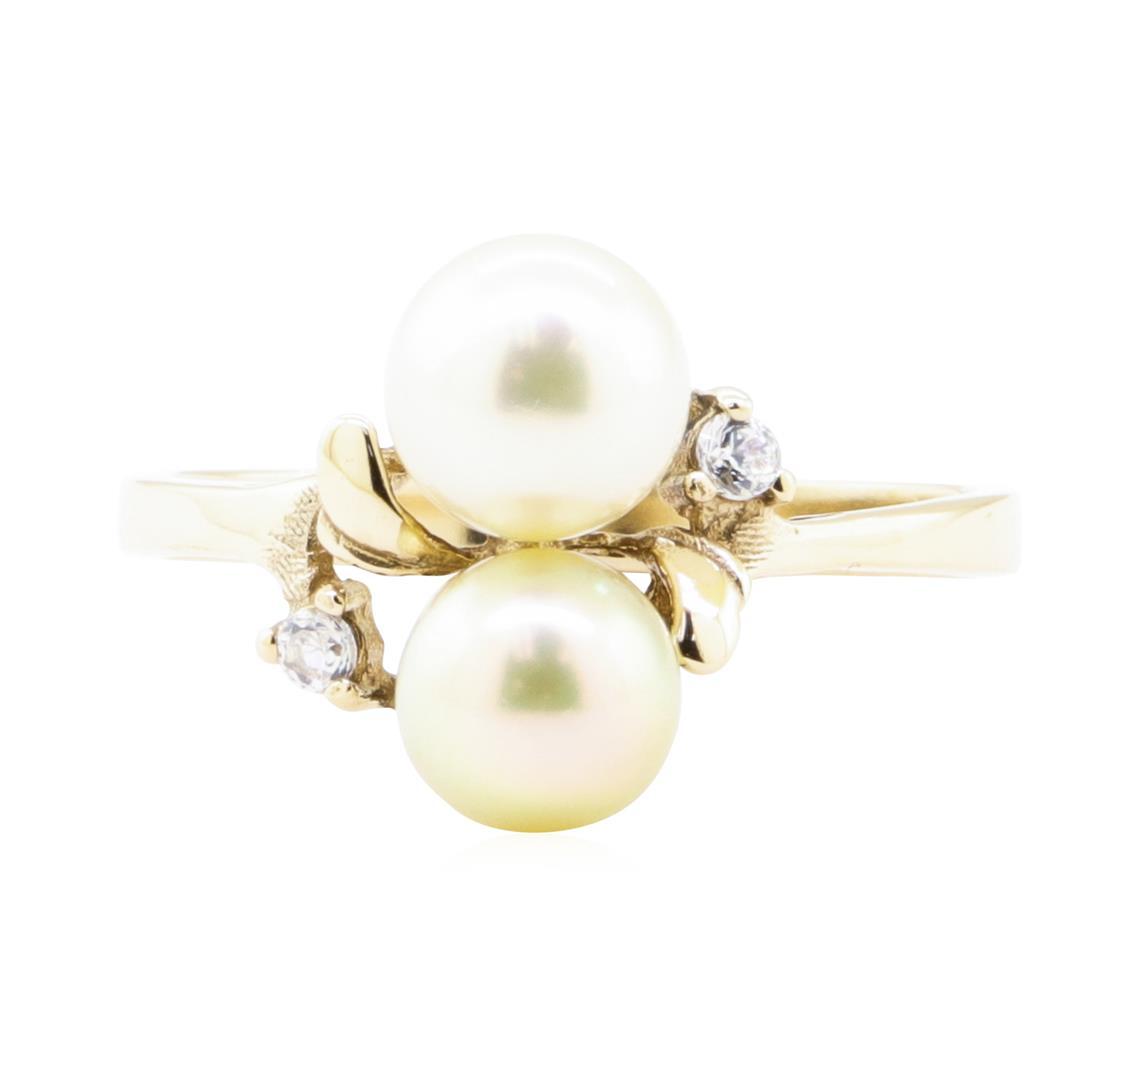 0.08 ctw Diamond and 7mm Round Cultured Pearl Ring - 14KT Yellow Gold